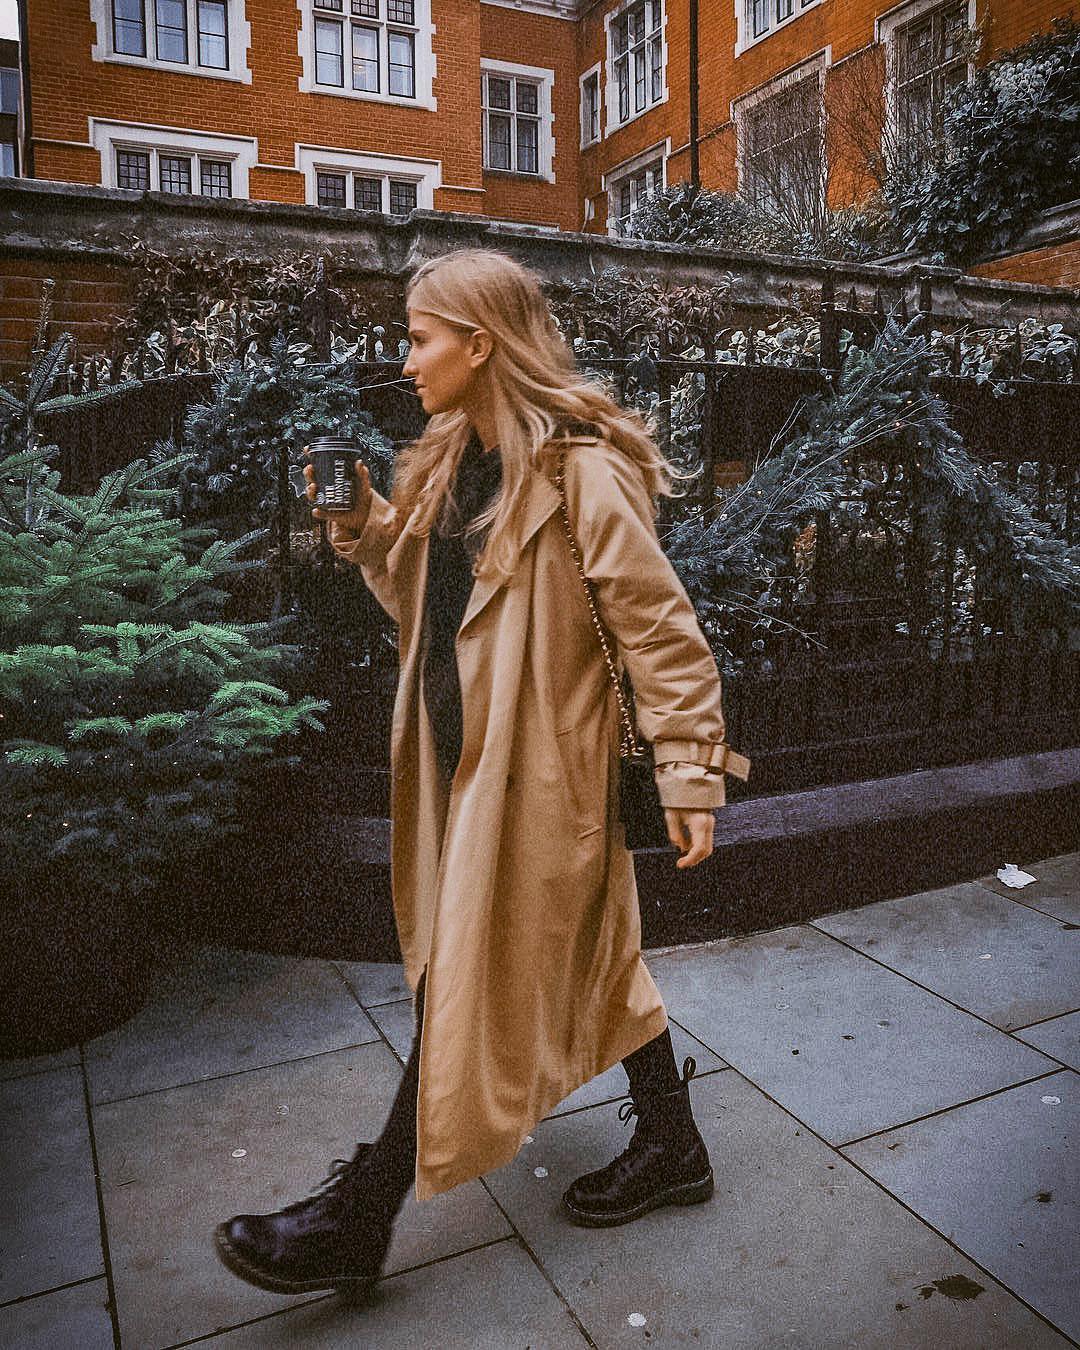 Long Camel Coat And Black Leather Combat
Boots